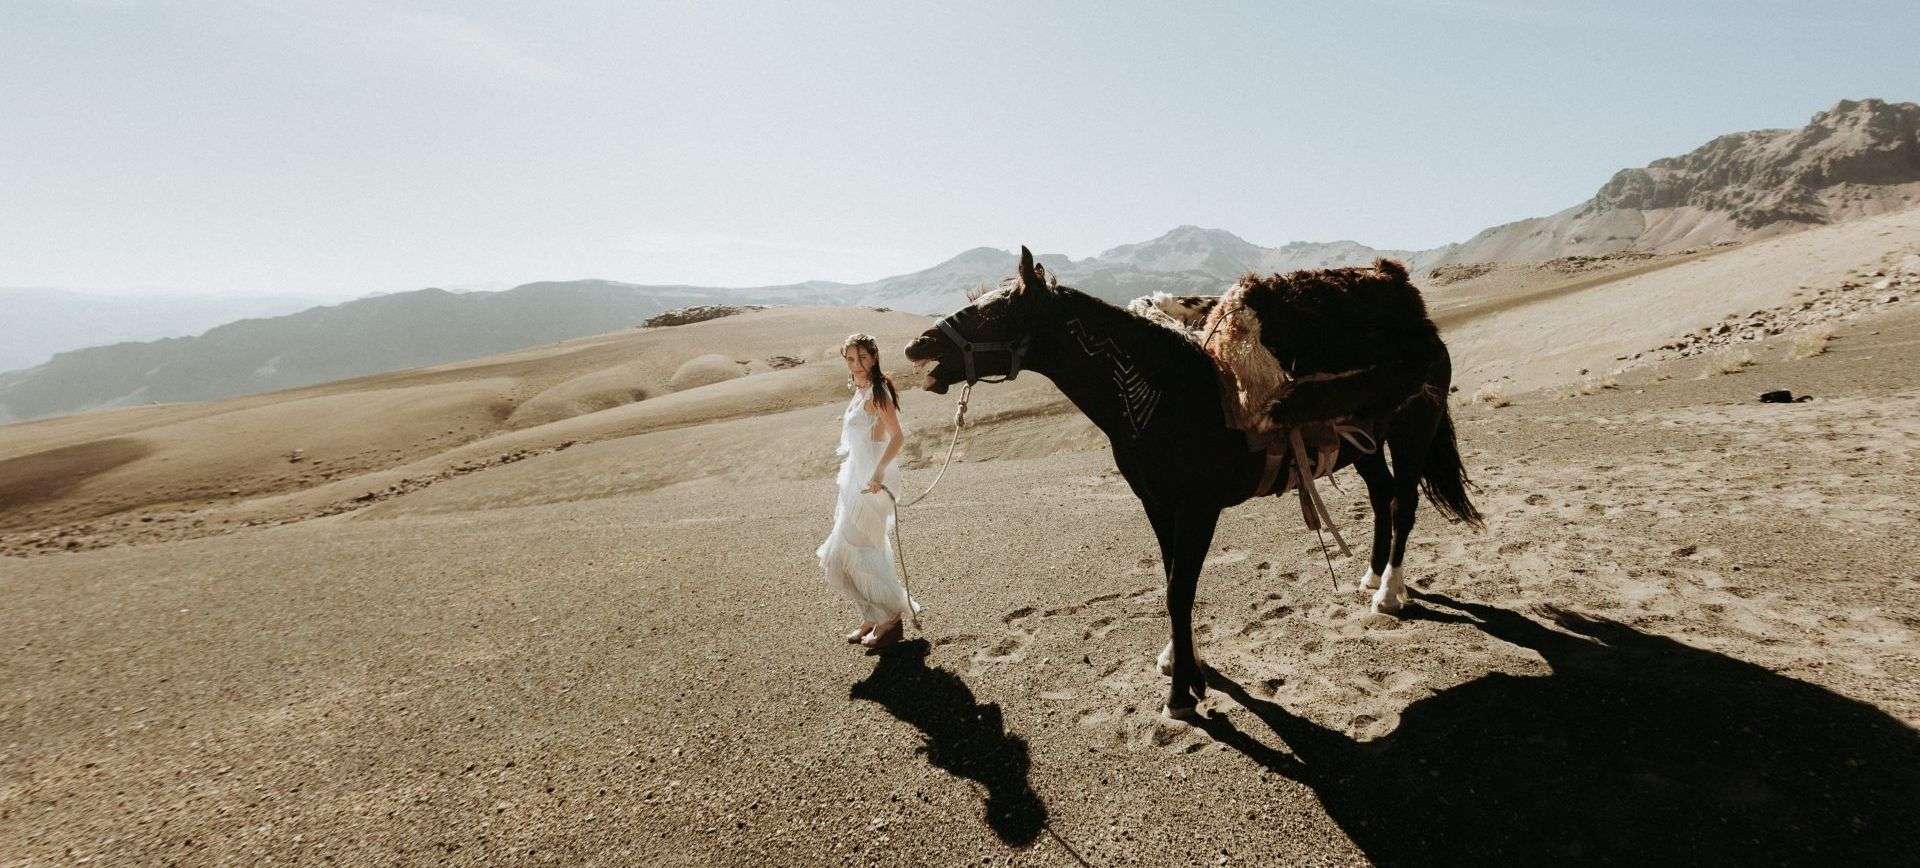 horse riding wedding in Chile - bride with horse in the andes